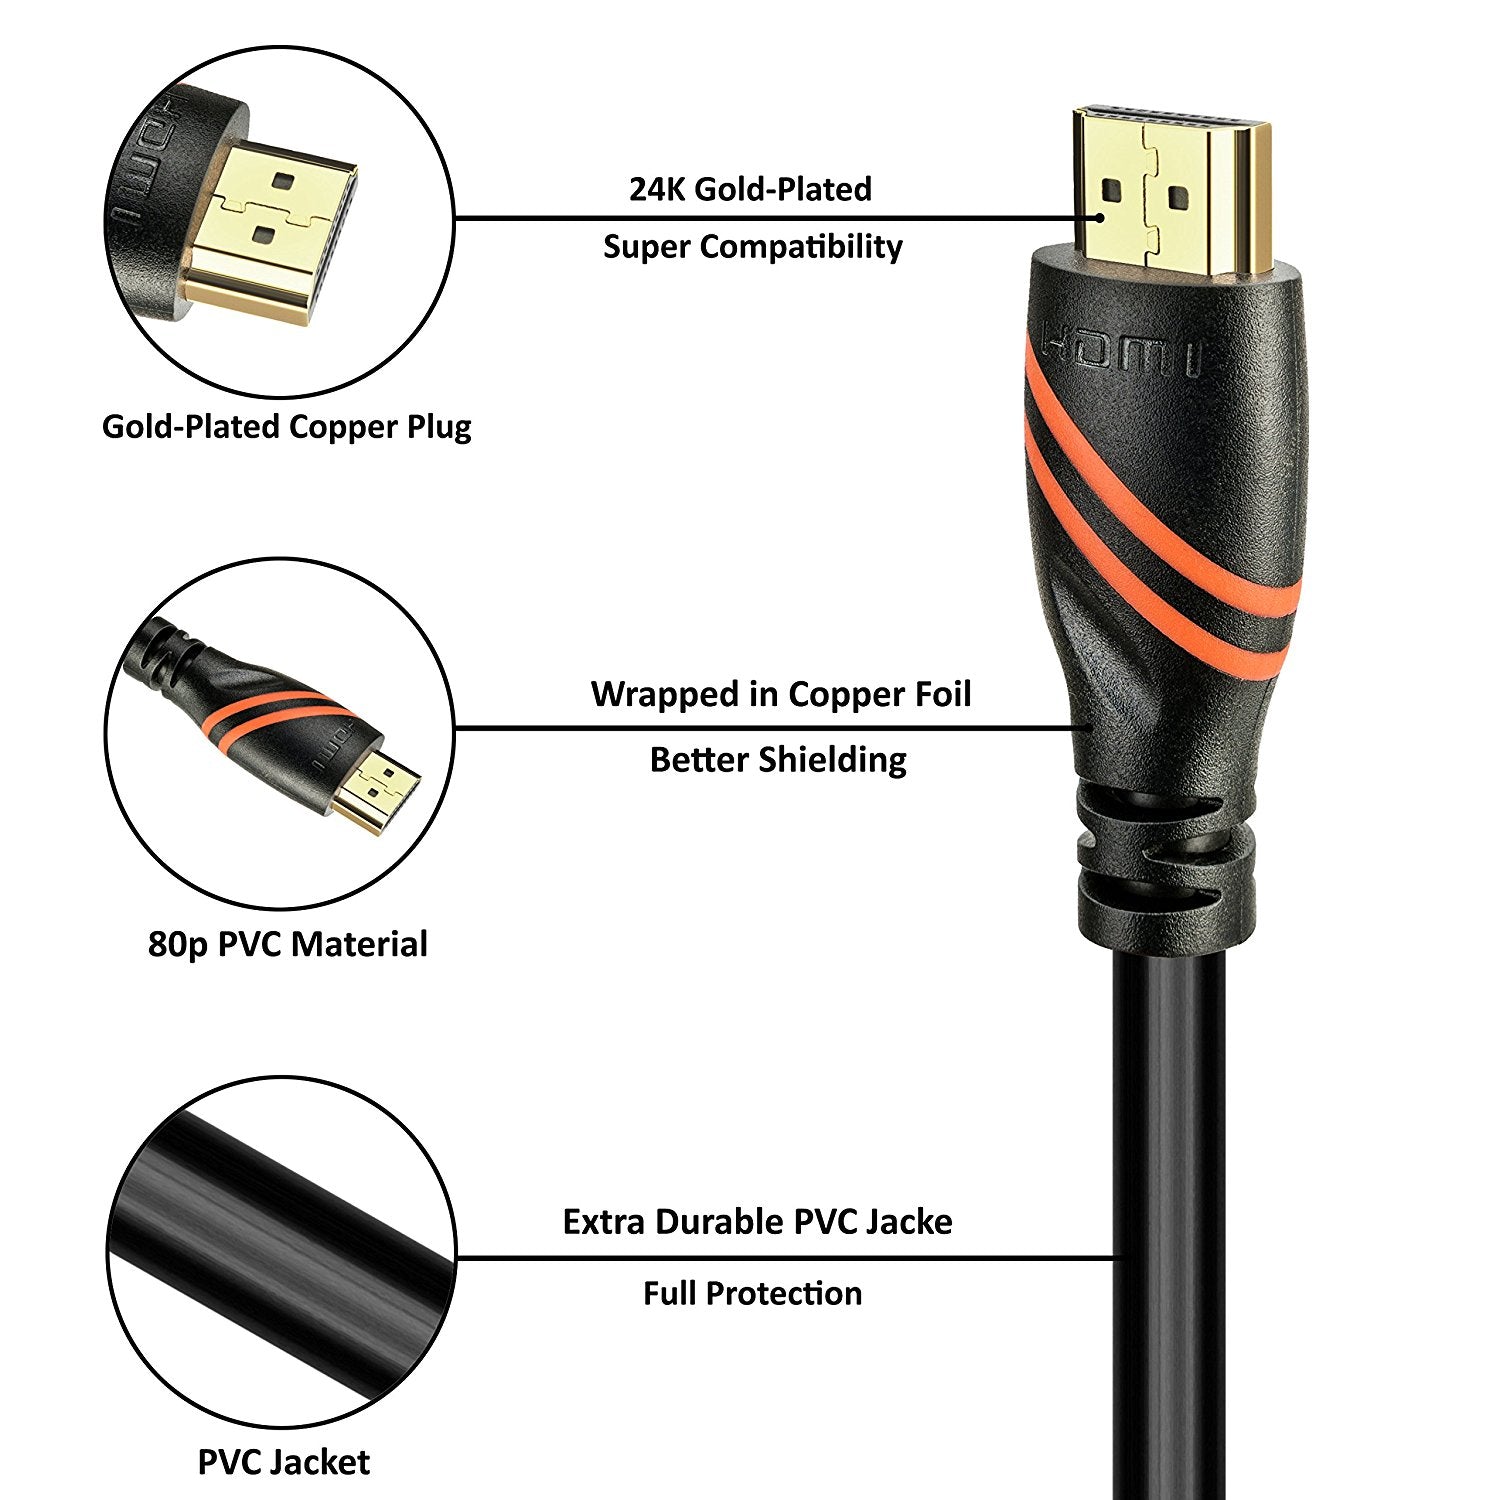 HDMI Cable IBRA HDMI Lead - 5M 4K@60hz HDMI 2.0 Cable Ultra High Speed 18Gbps Support Ethernet, Audio Return Channel, Video 4K UHD 2160p, HD 1080p, 3D, Xbox, PS3, PS4, PC, Samsung TV, Apple TV -Black